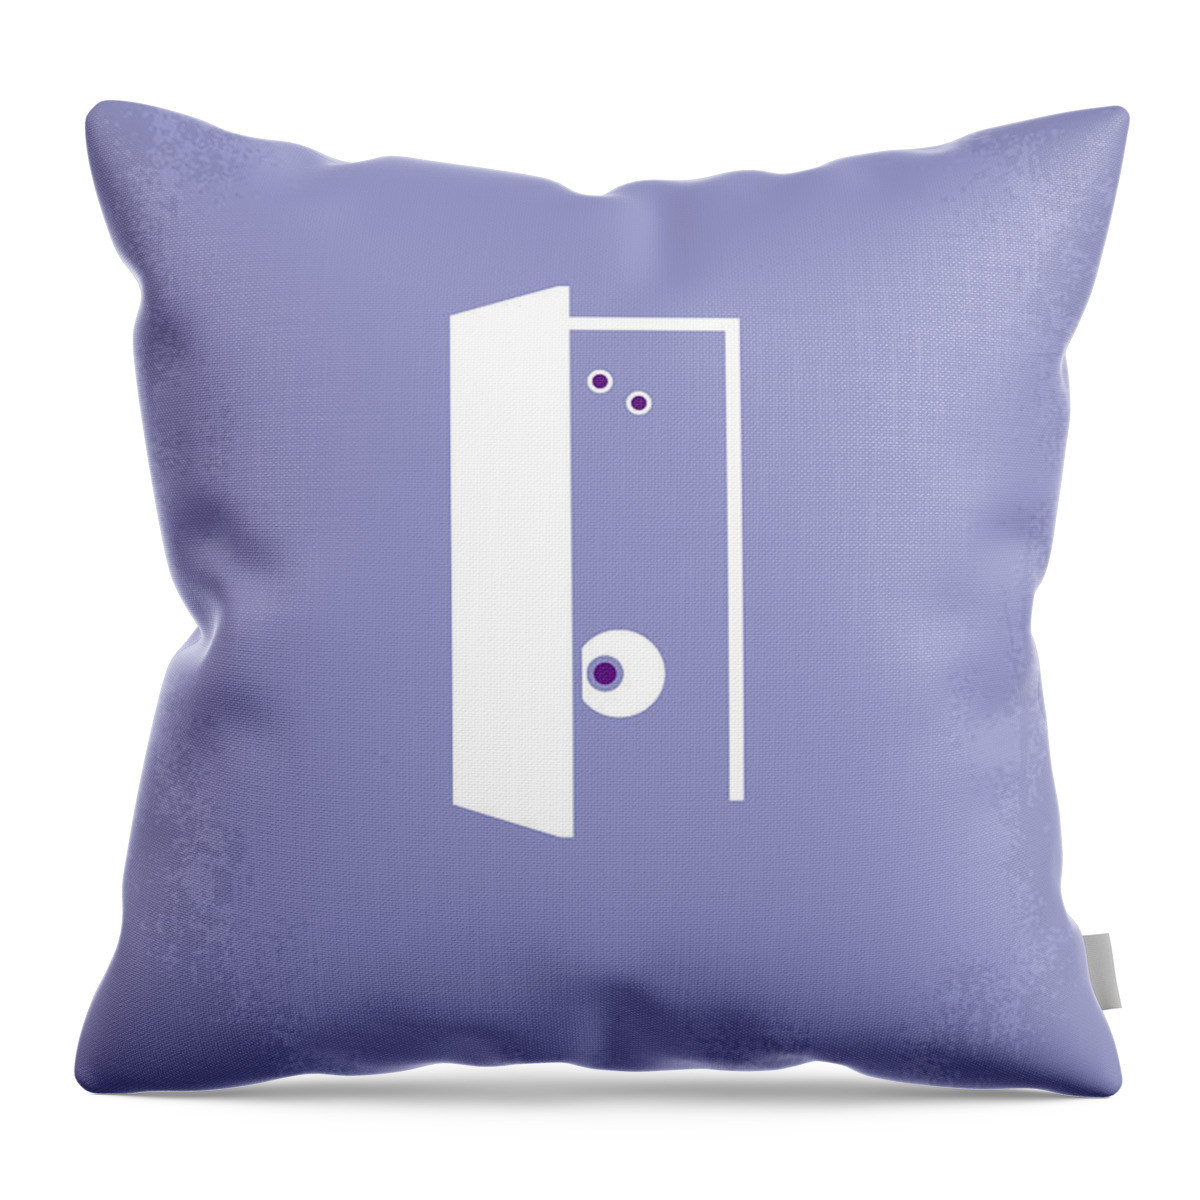 Monster Inc Throw Pillow featuring the digital art No161 My Monster Inc minimal movie poster by Chungkong Art